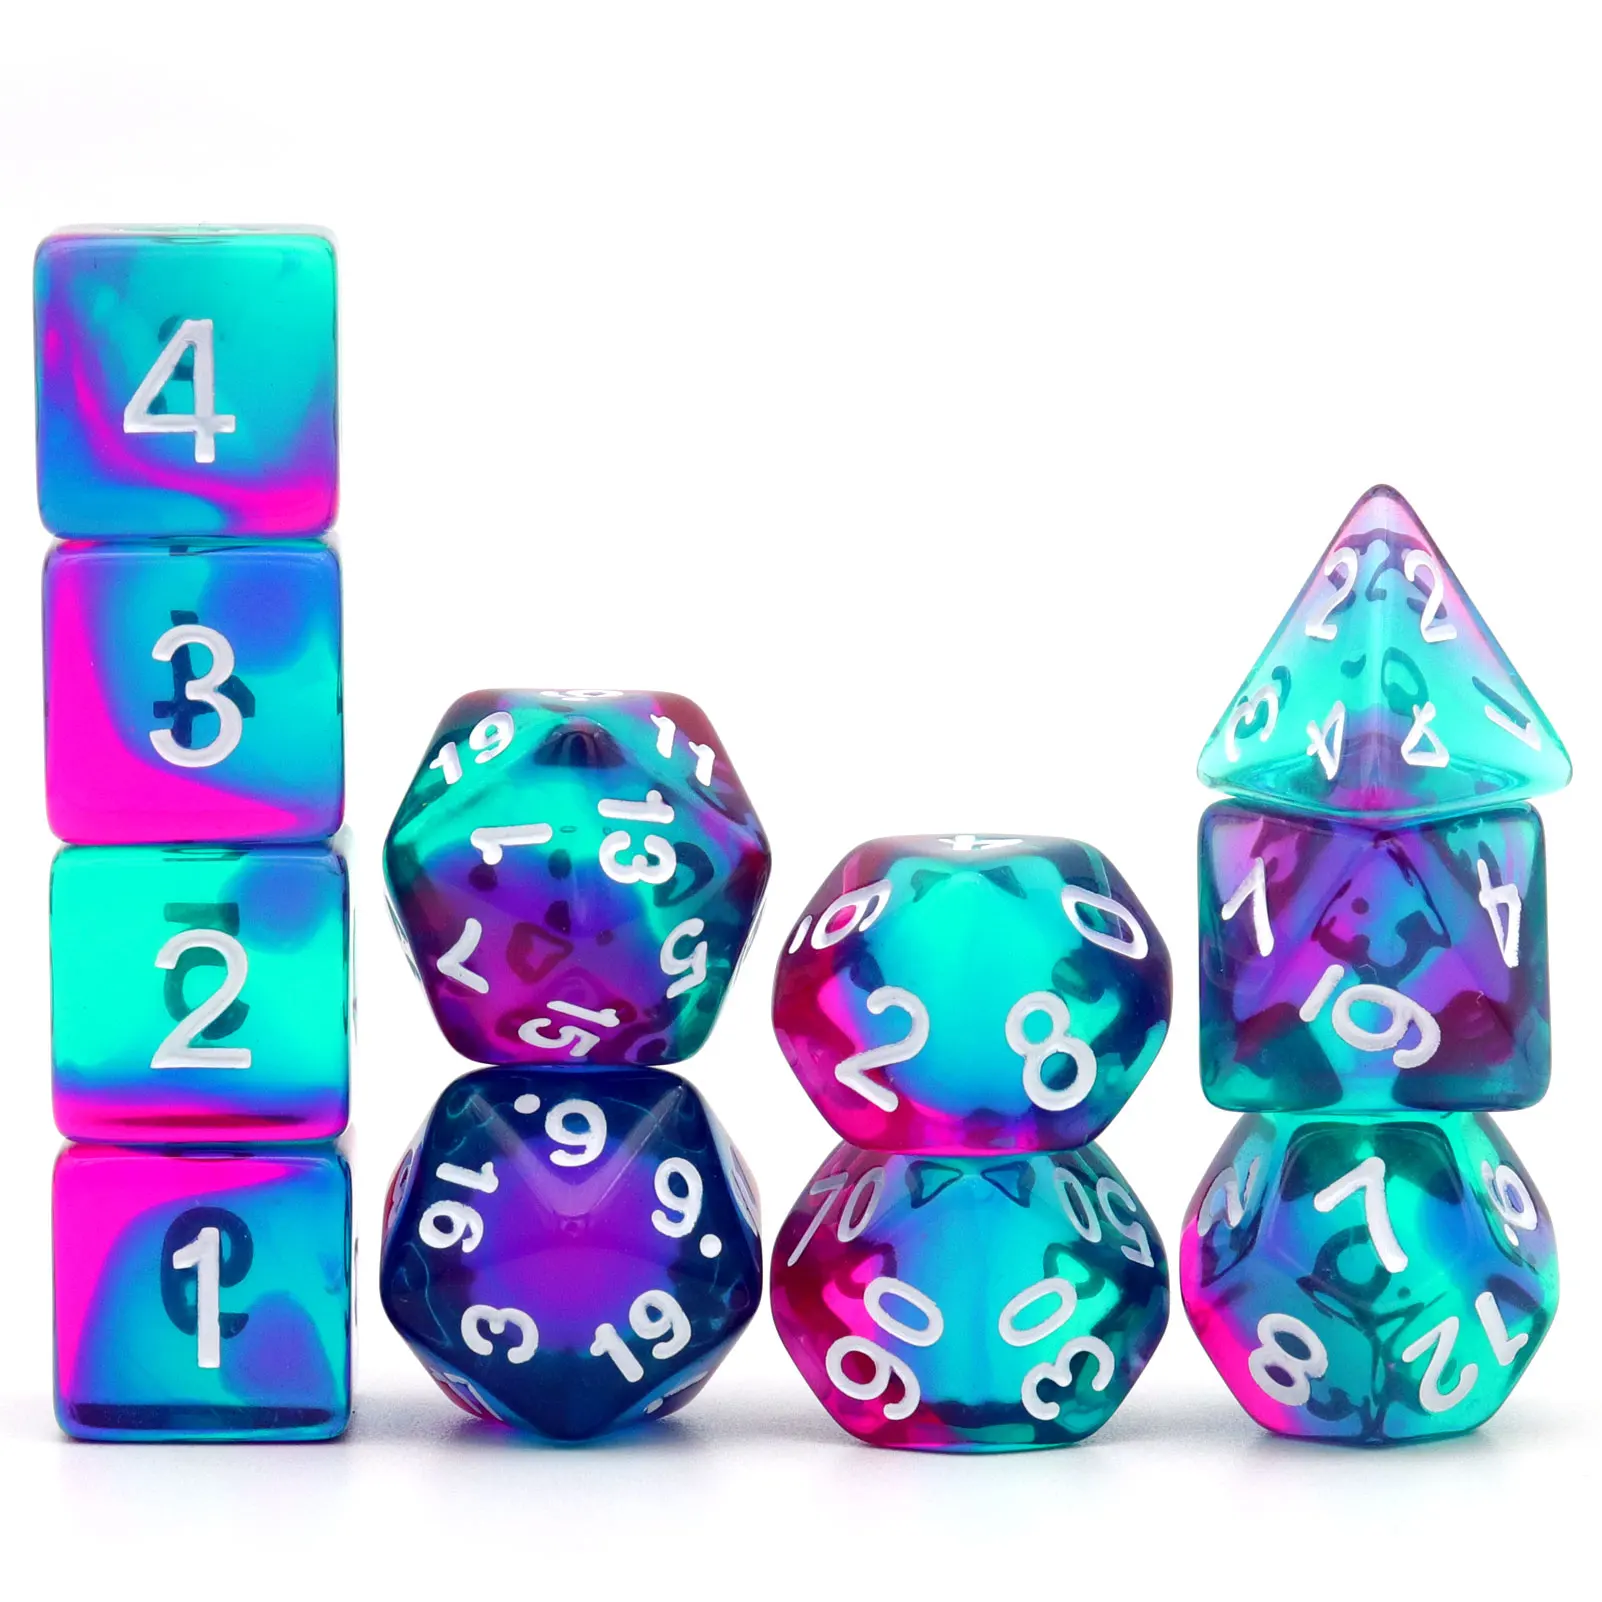 

Haxtec 11PCS DND Dice Set Extra D6 D20 Polyhedral D&D Dice for Roleplaying Dice Games-Translucent Purple Teal